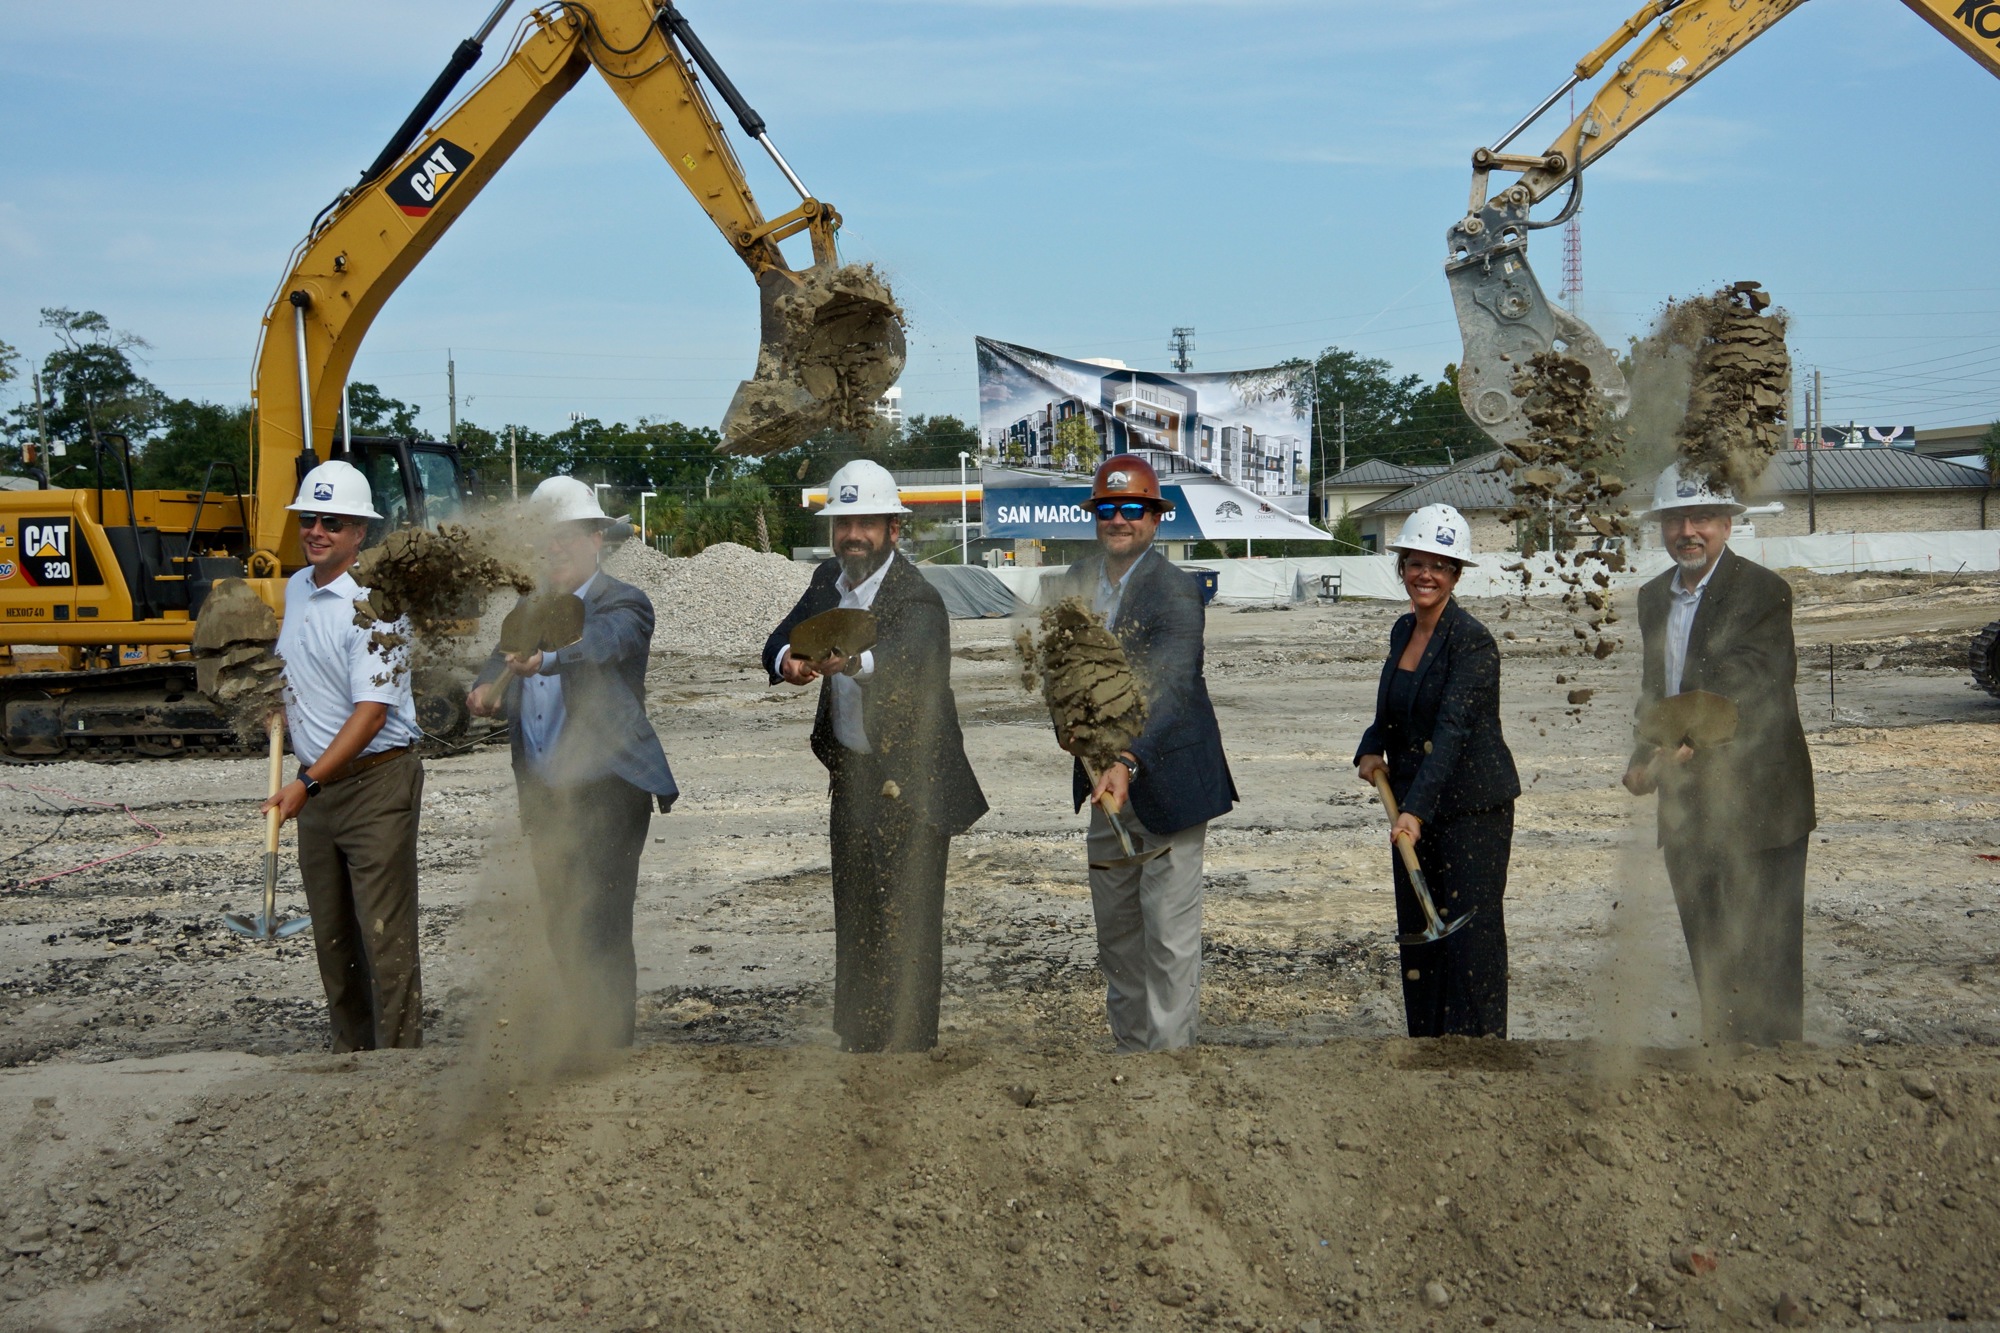 Live Oak Contracting, Chance Partners, Ameris Bank and City Council member LeAnna Cumber, second from right, break ground on the San Marco Crossing development.